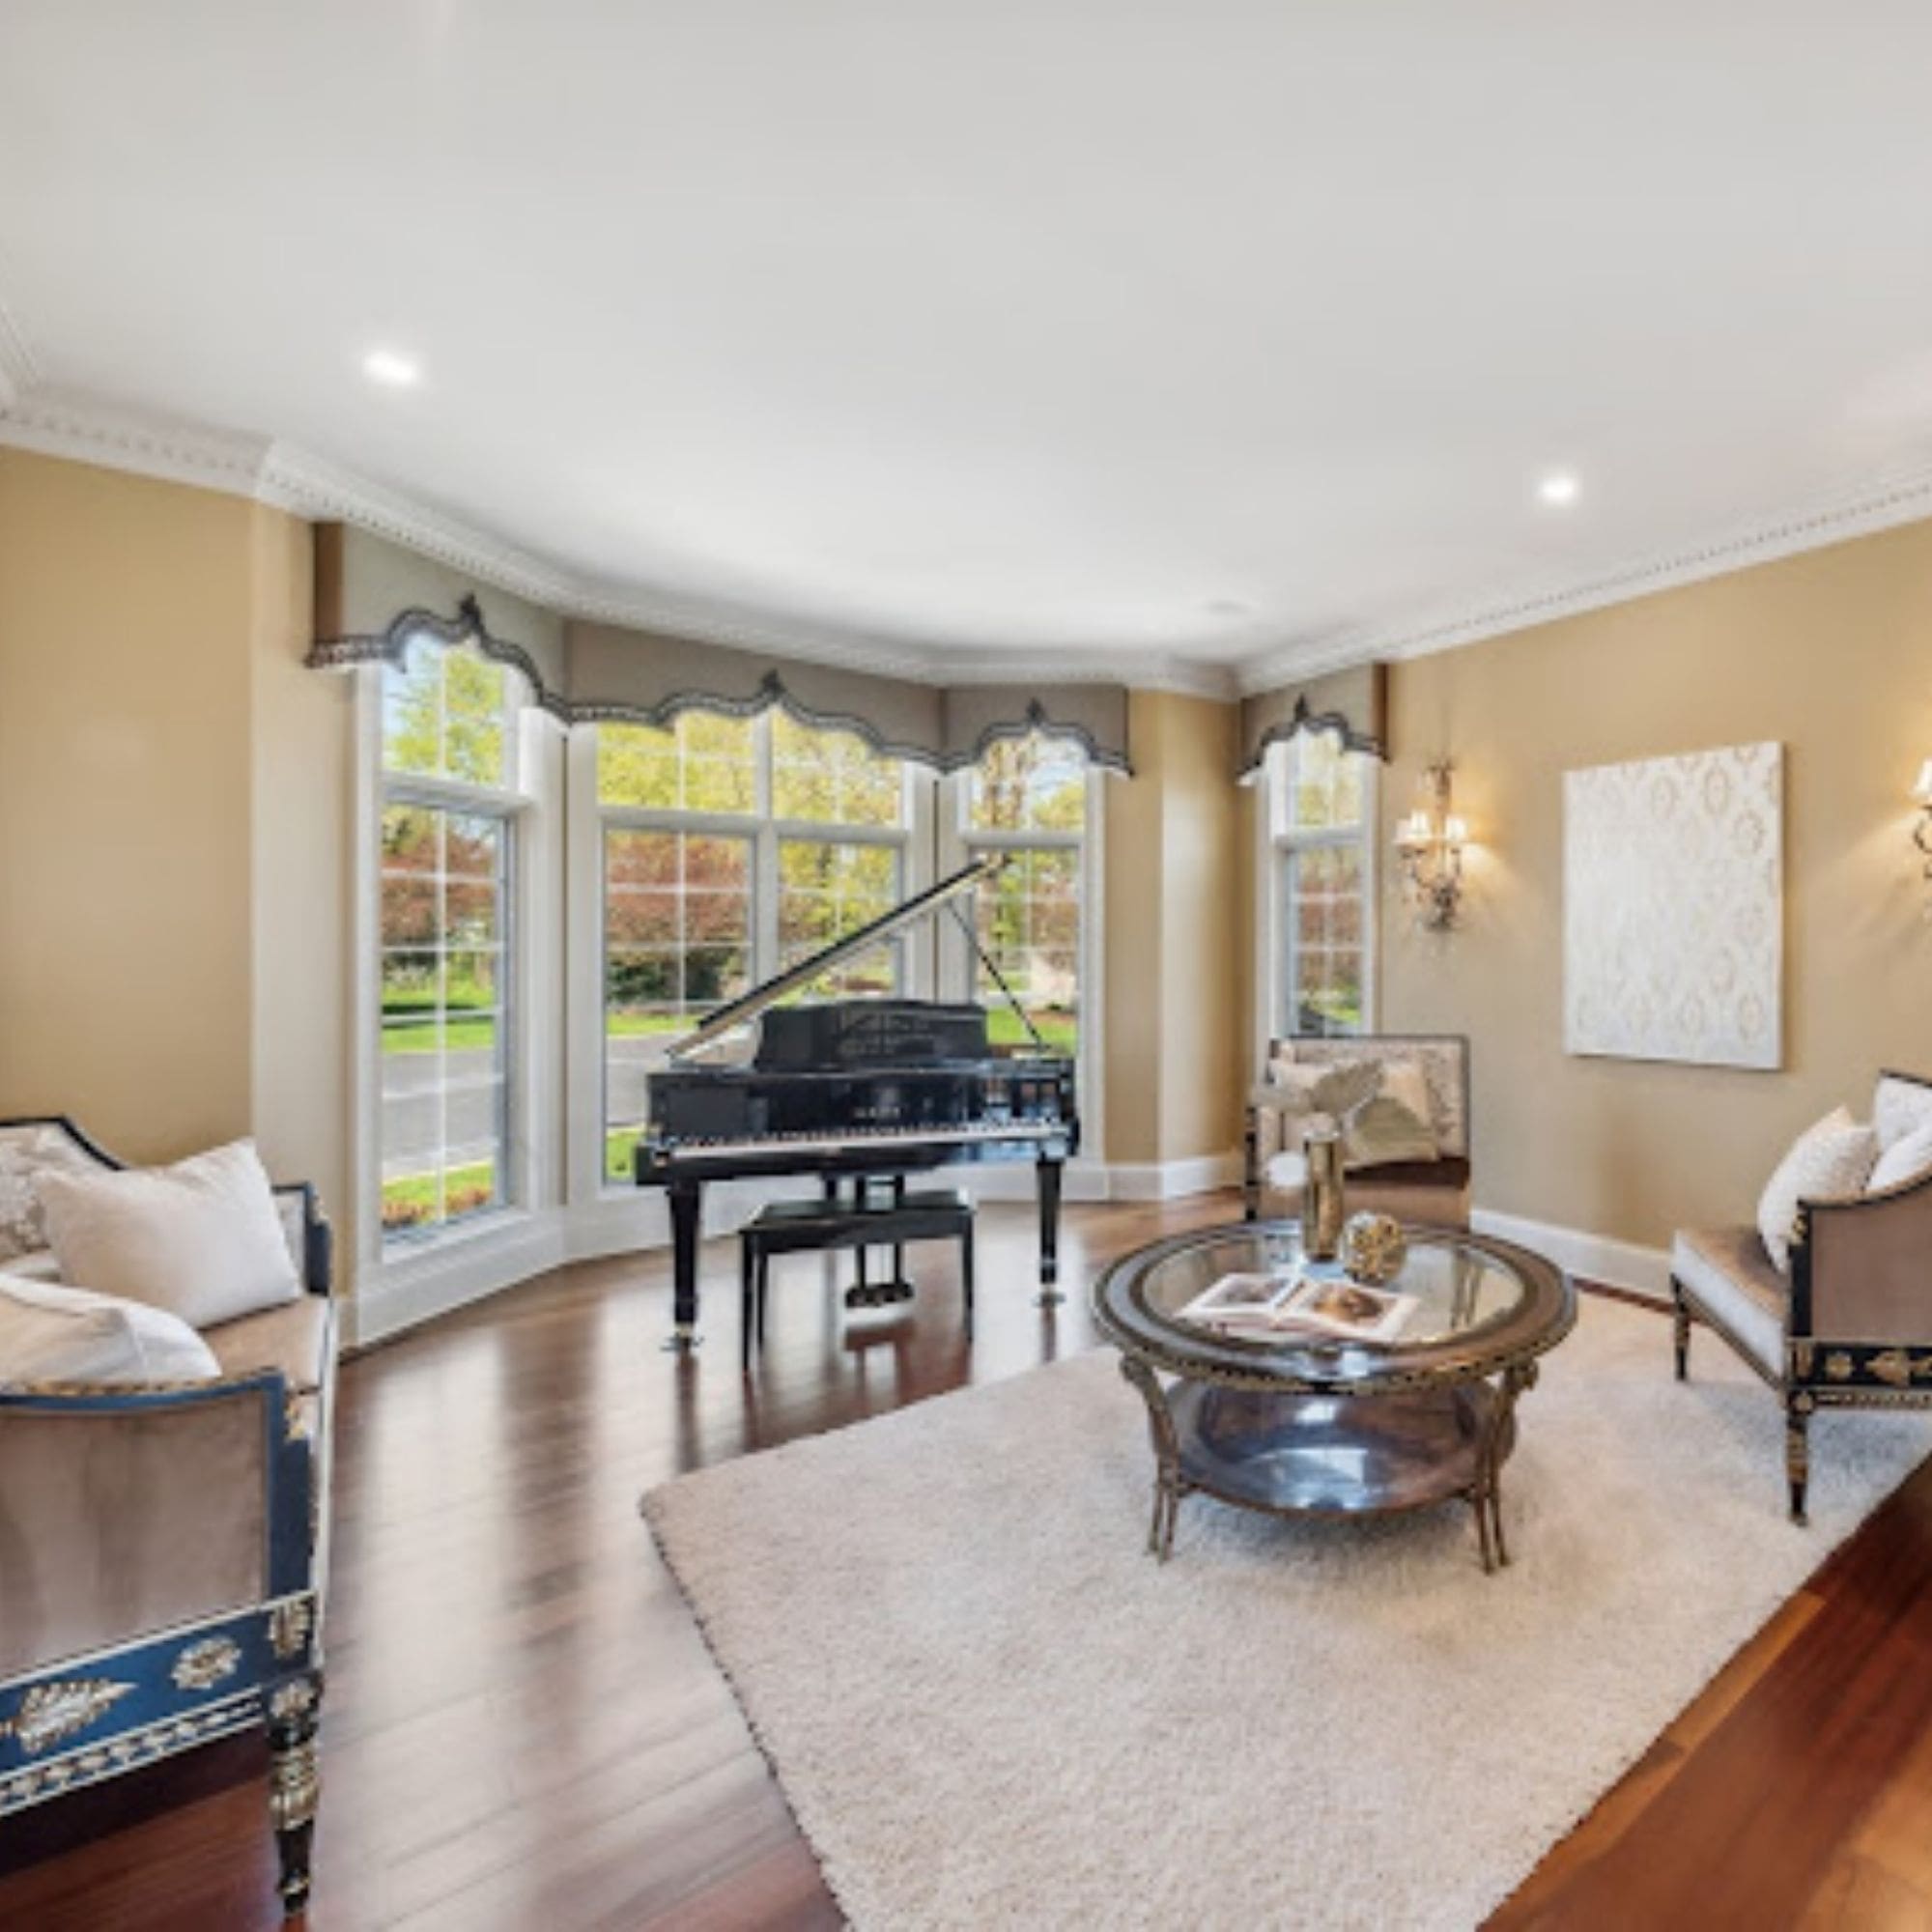 A cozy staged living room with a grand piano and comfortable chairs, perfect for relaxing or entertaining guests.